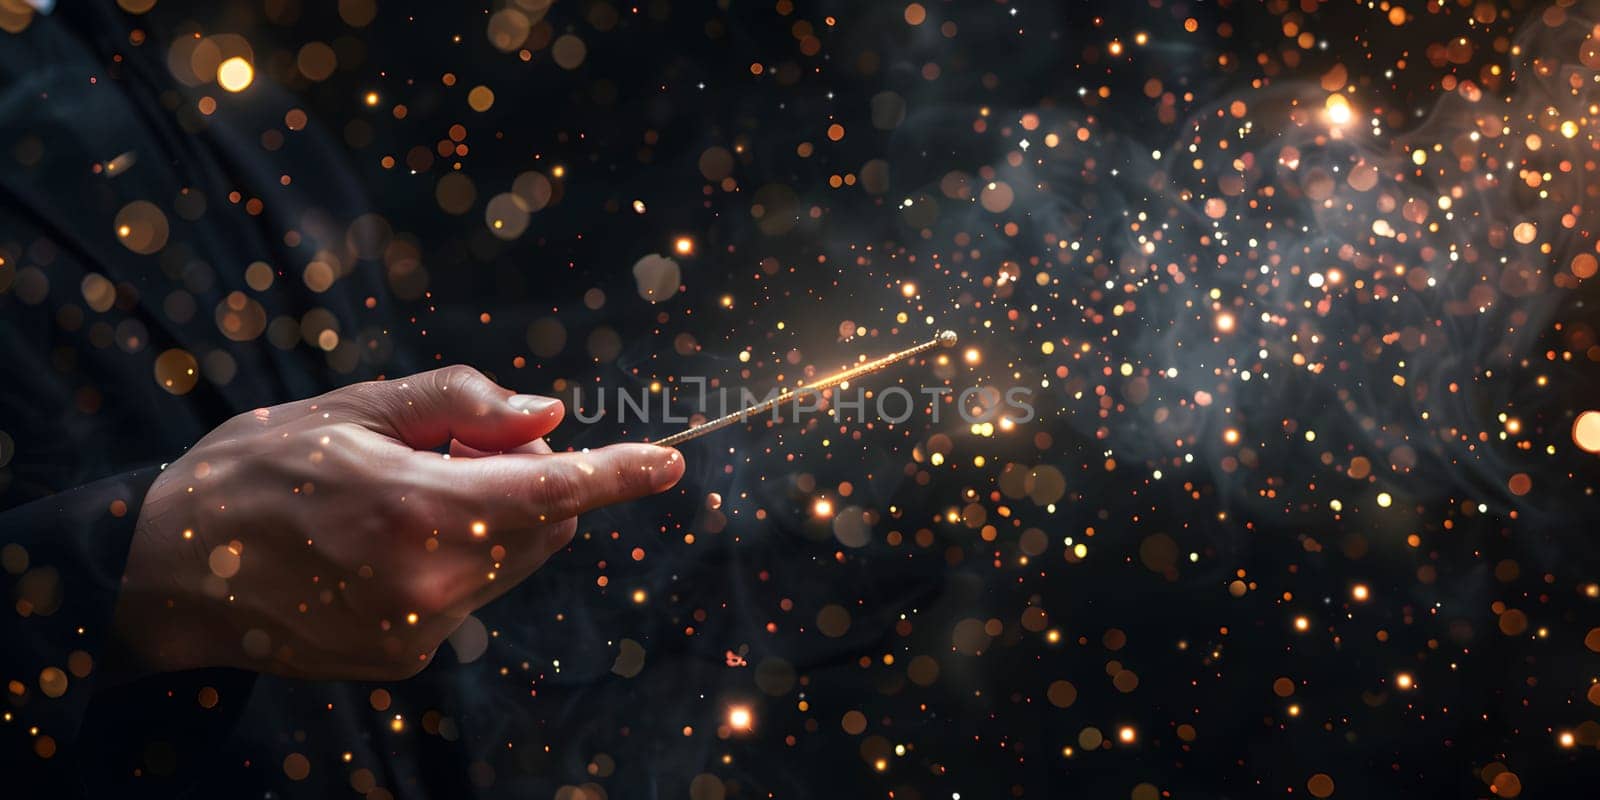 Image of man magician showing trick against color background. High quality photo